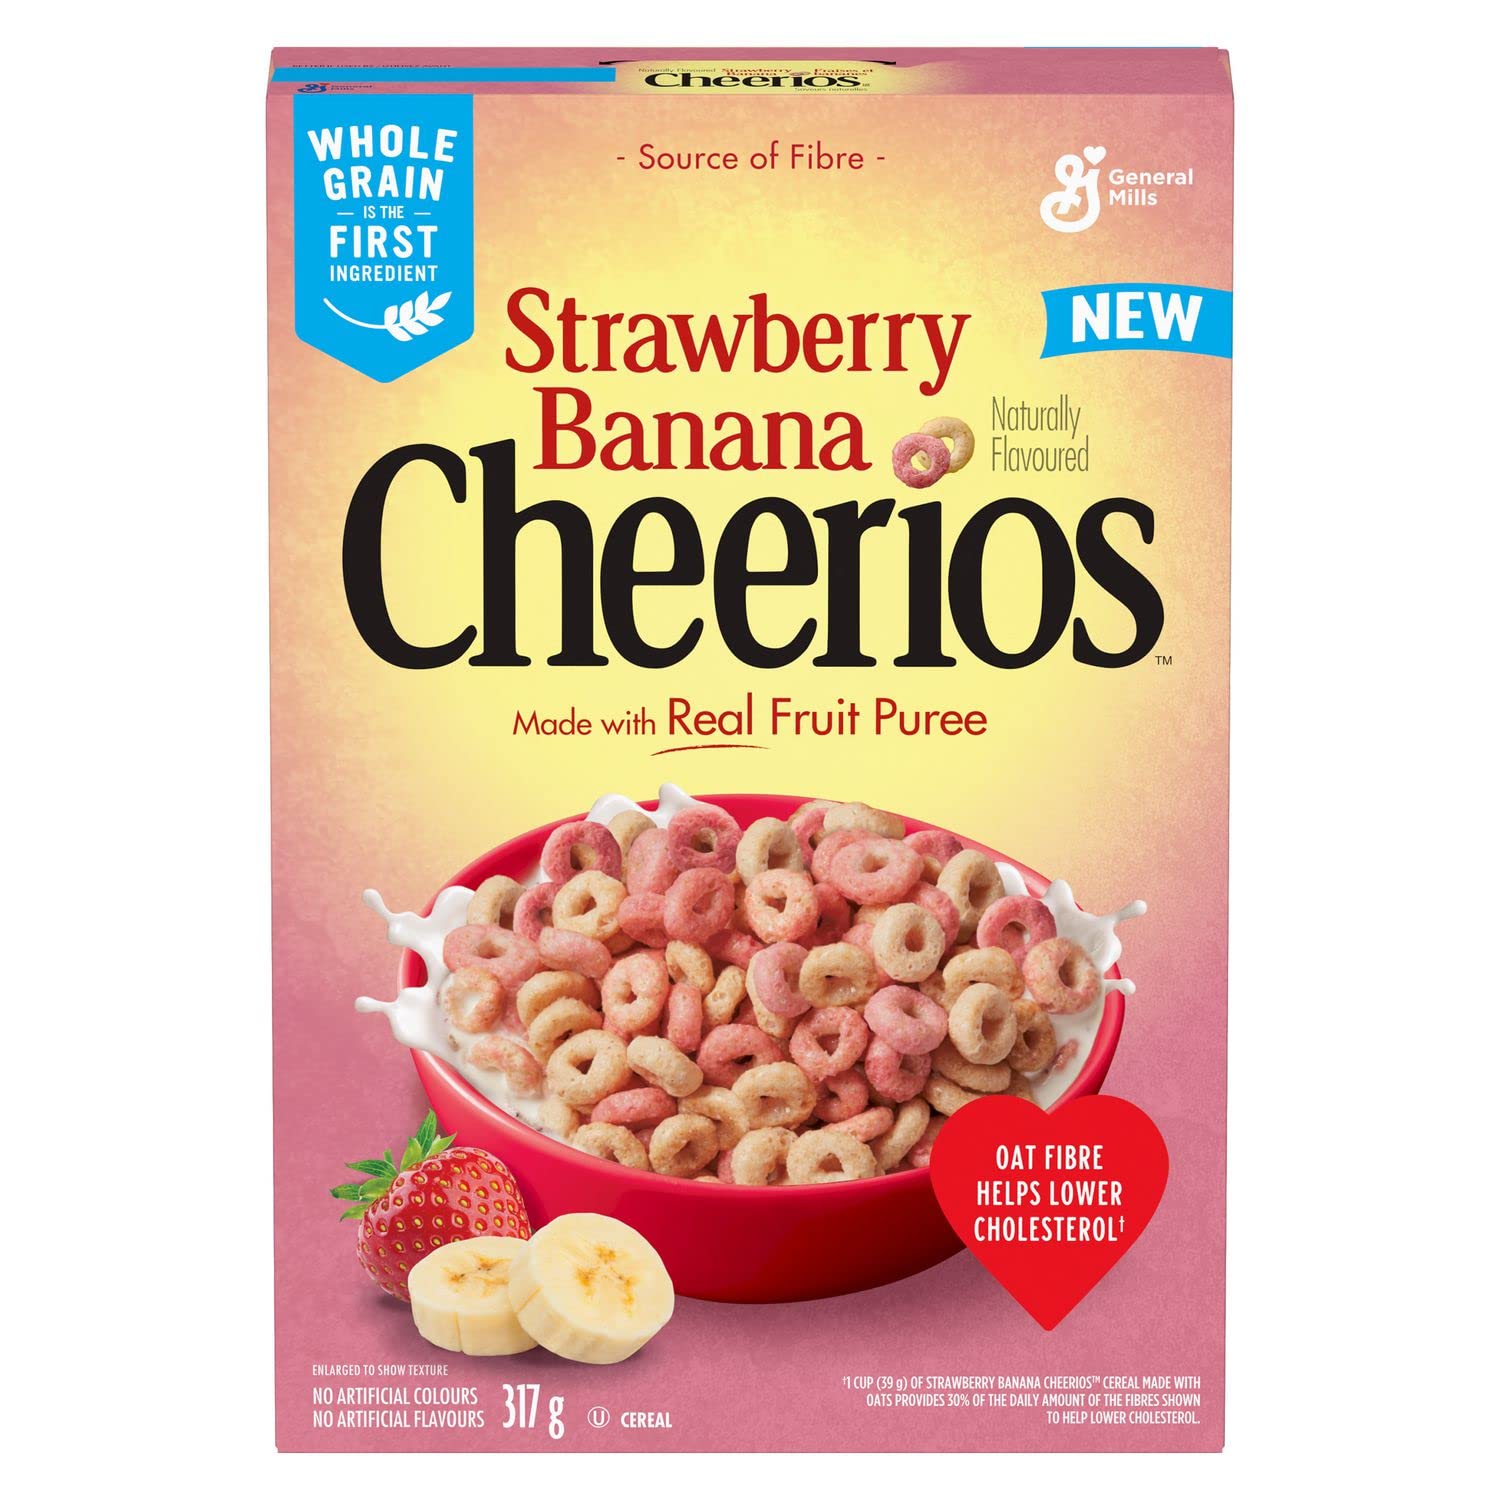 Cheerios Naturally Flavored Strawberry Banana Cereal front cover